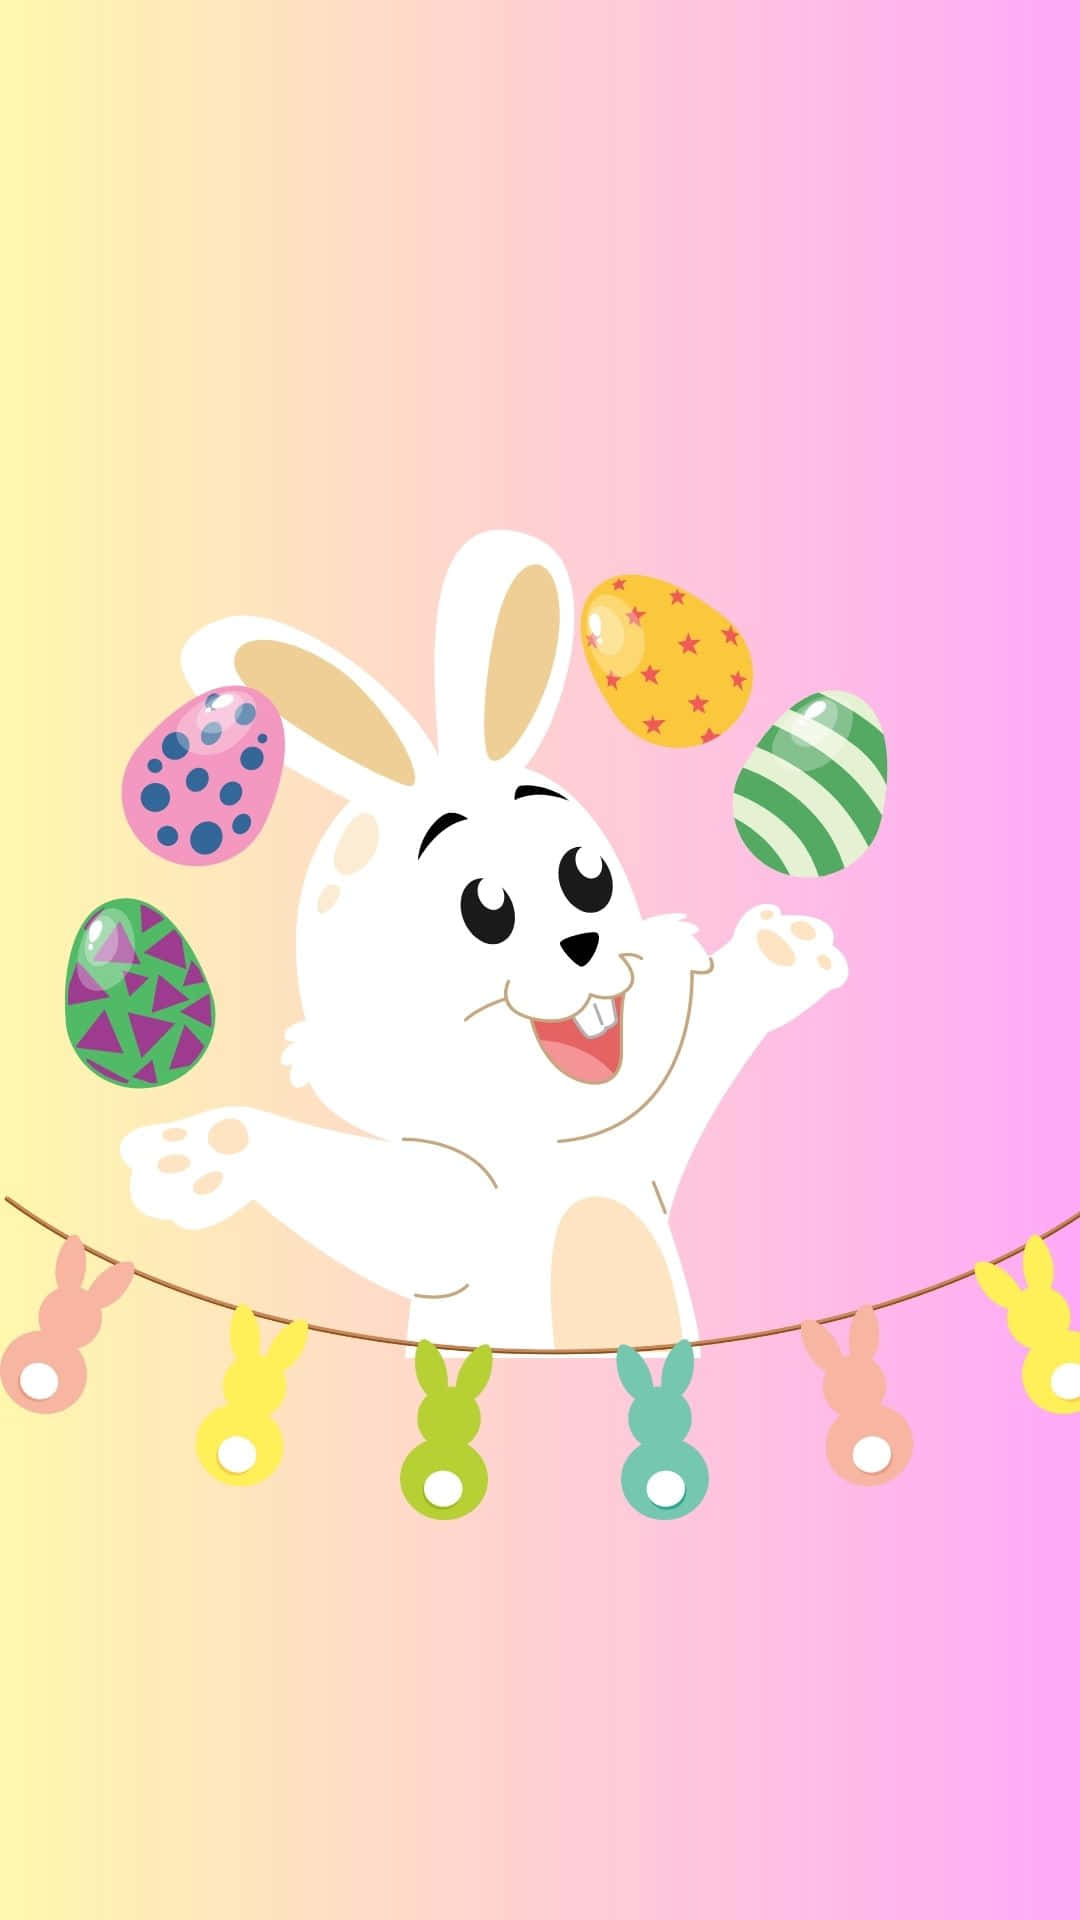 A Festive Easter Bunny Decorating Eggs To Celebrate The Holiday.